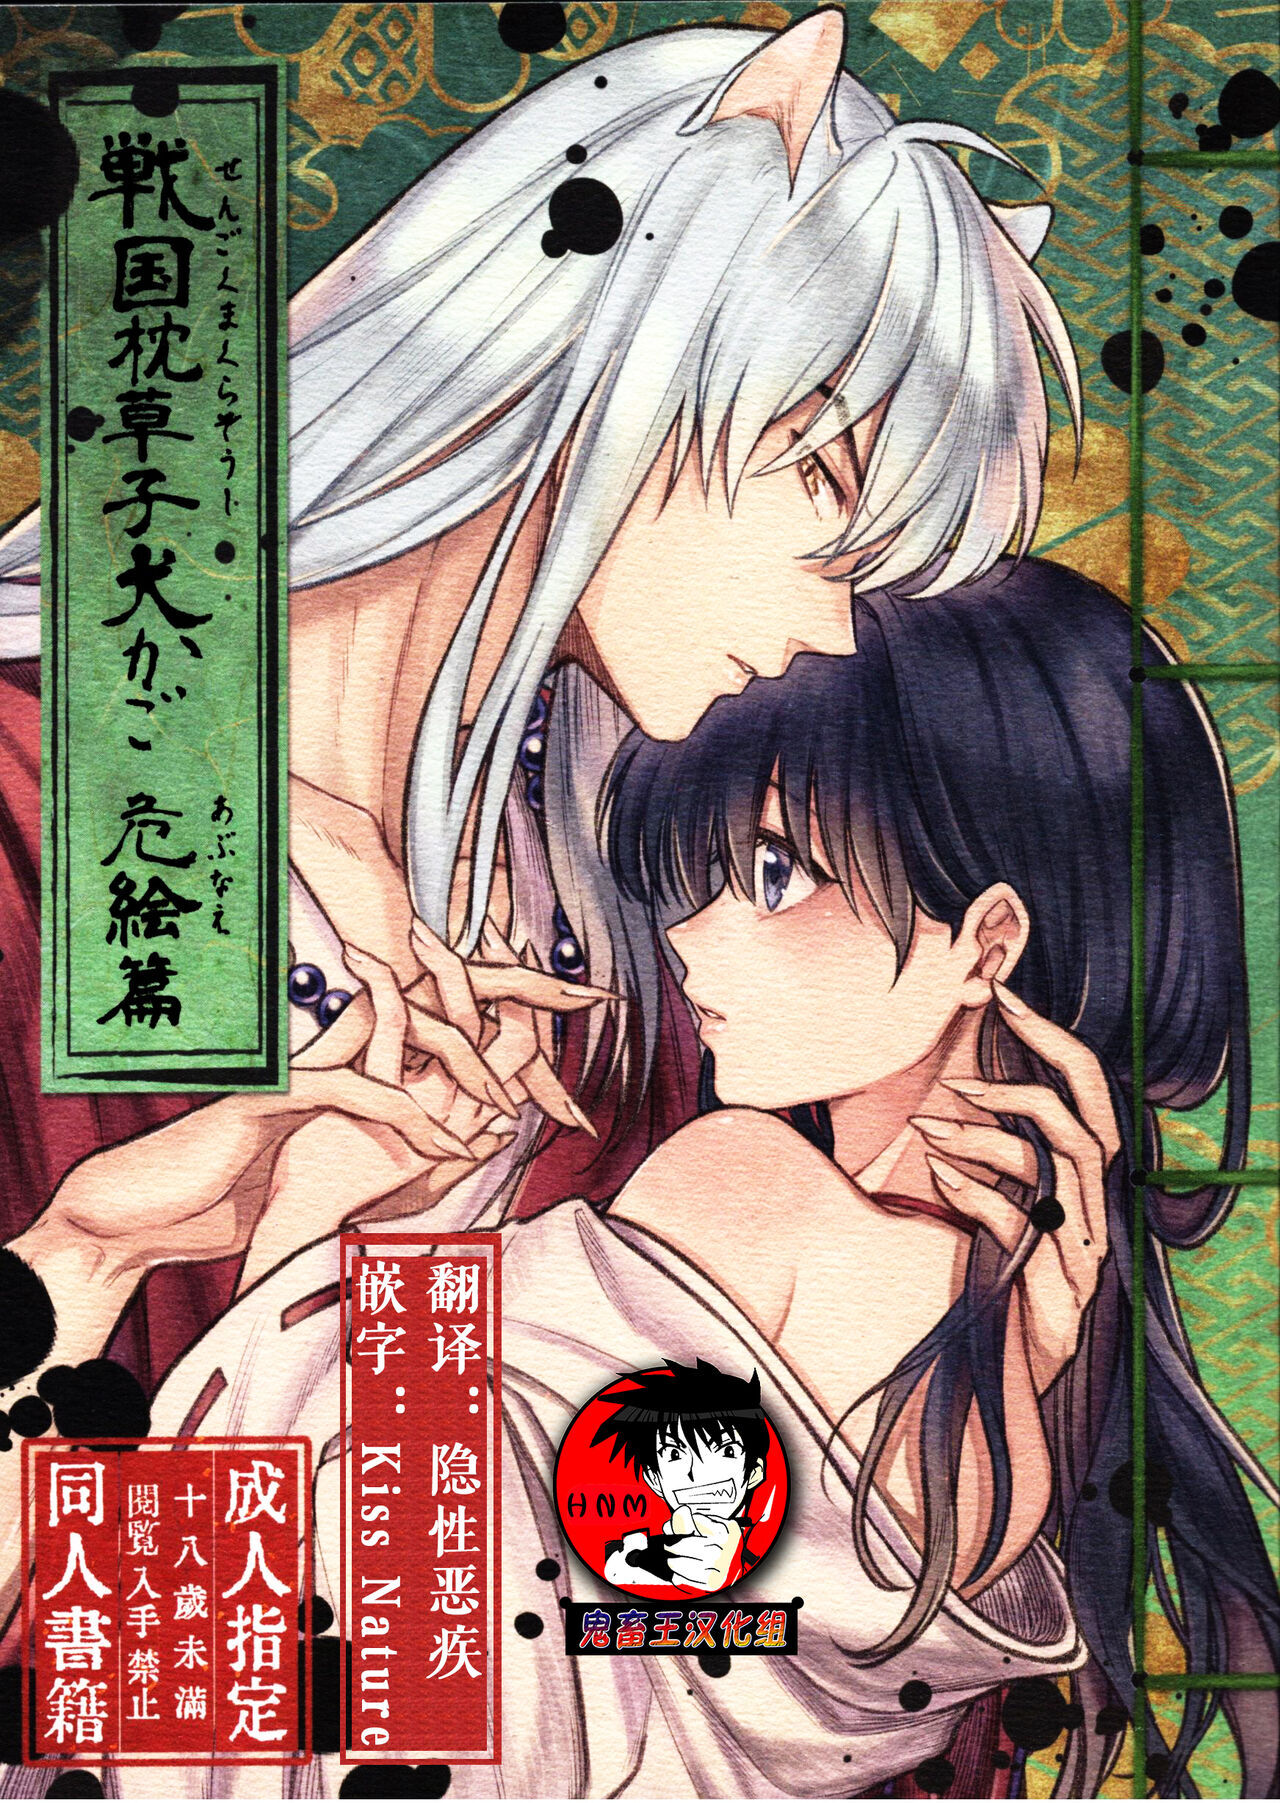 Inuyasha Anime Porn - Inuyasha - sorted by number of objects - Free Hentai